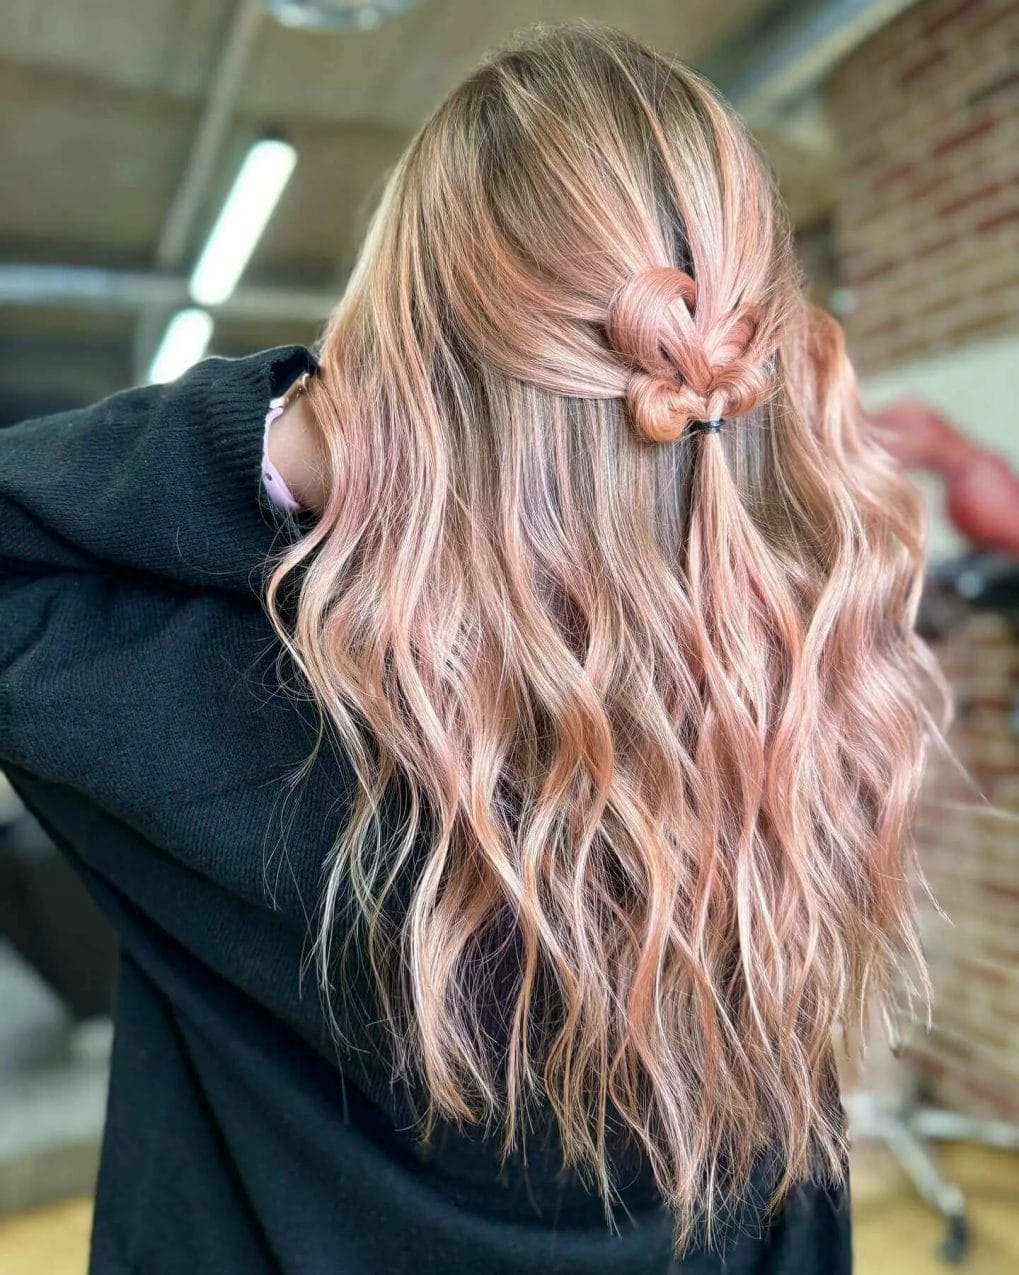 Soft beachy waves in a rose gold and blonde half-updo, ideal for a relaxed birthday look.